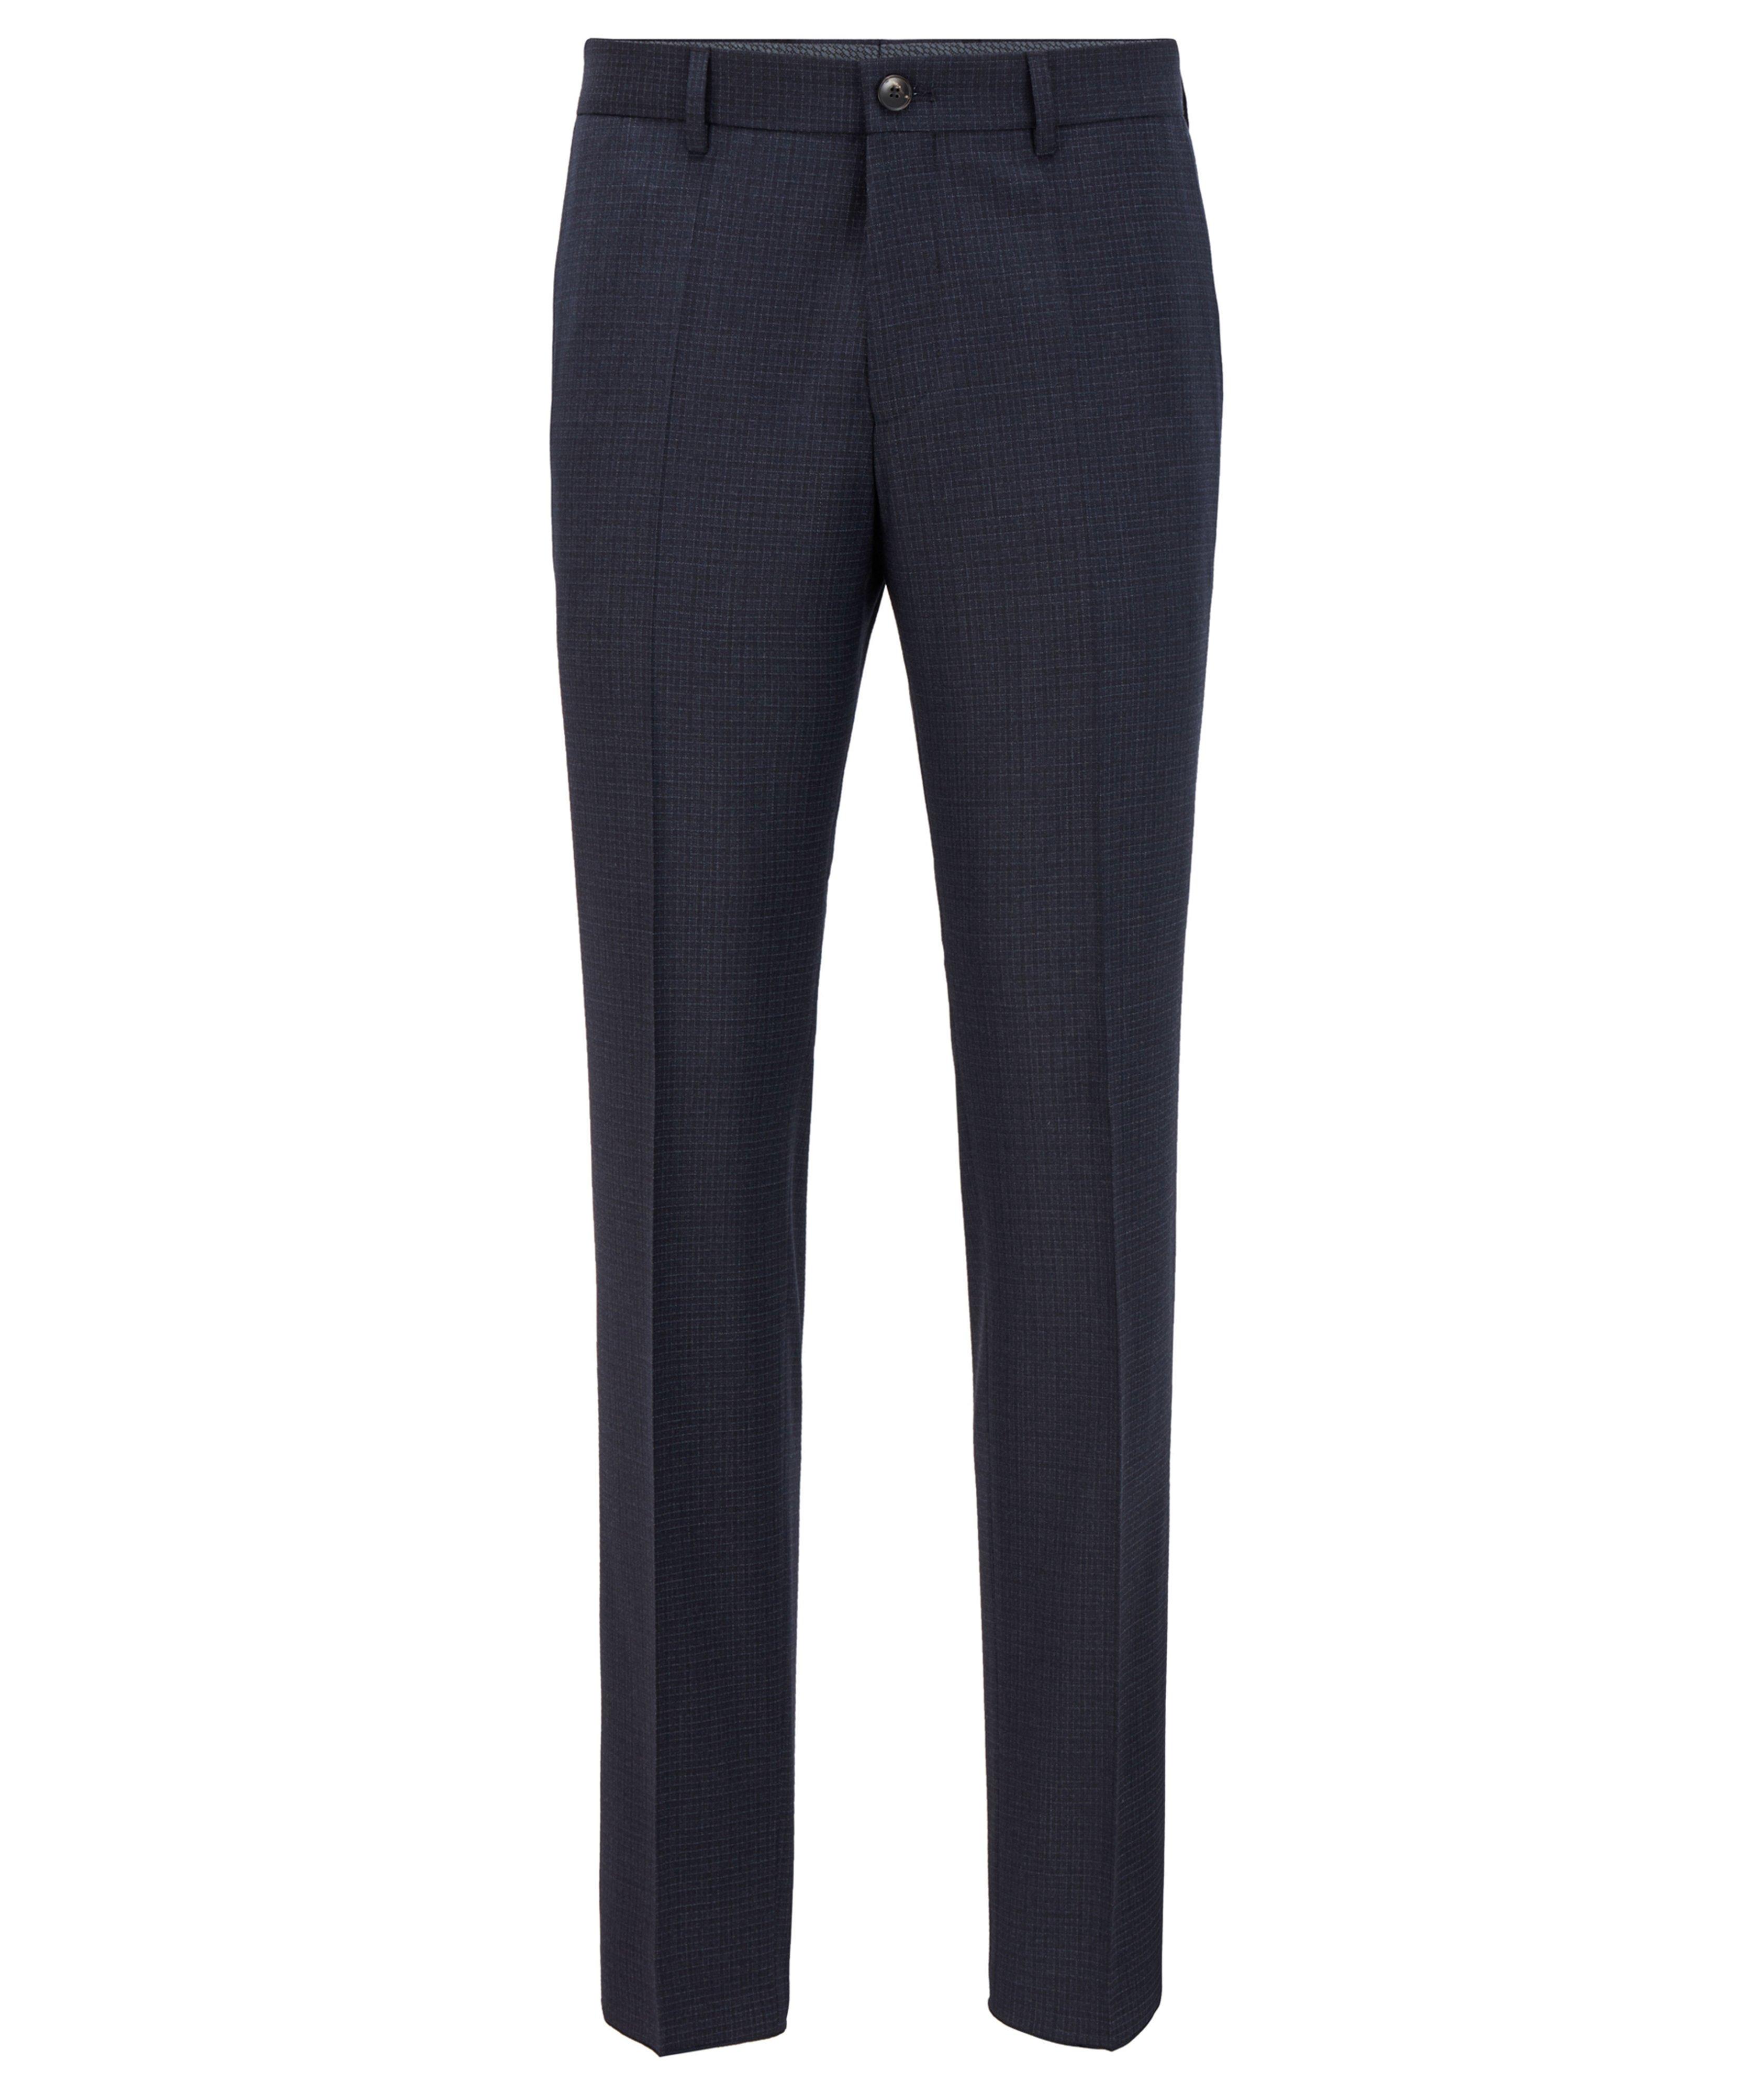 Slim Fit Checkered Stretch Wool Trousers image 0